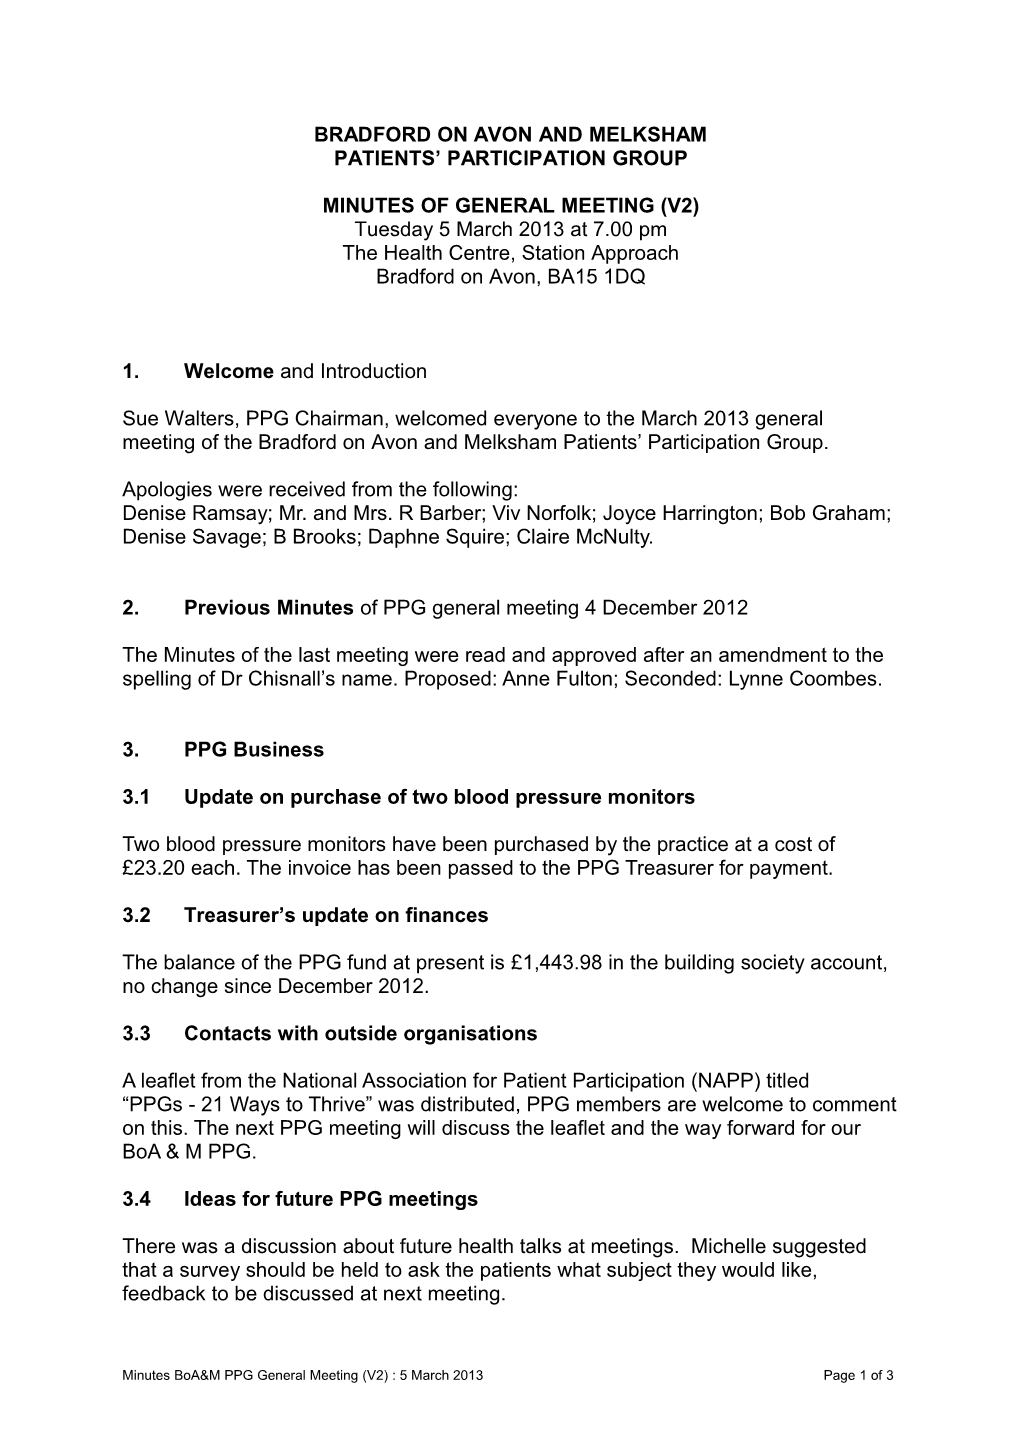 DRAFT Minutes of PPG Meeting Tuesday 5 March 2013